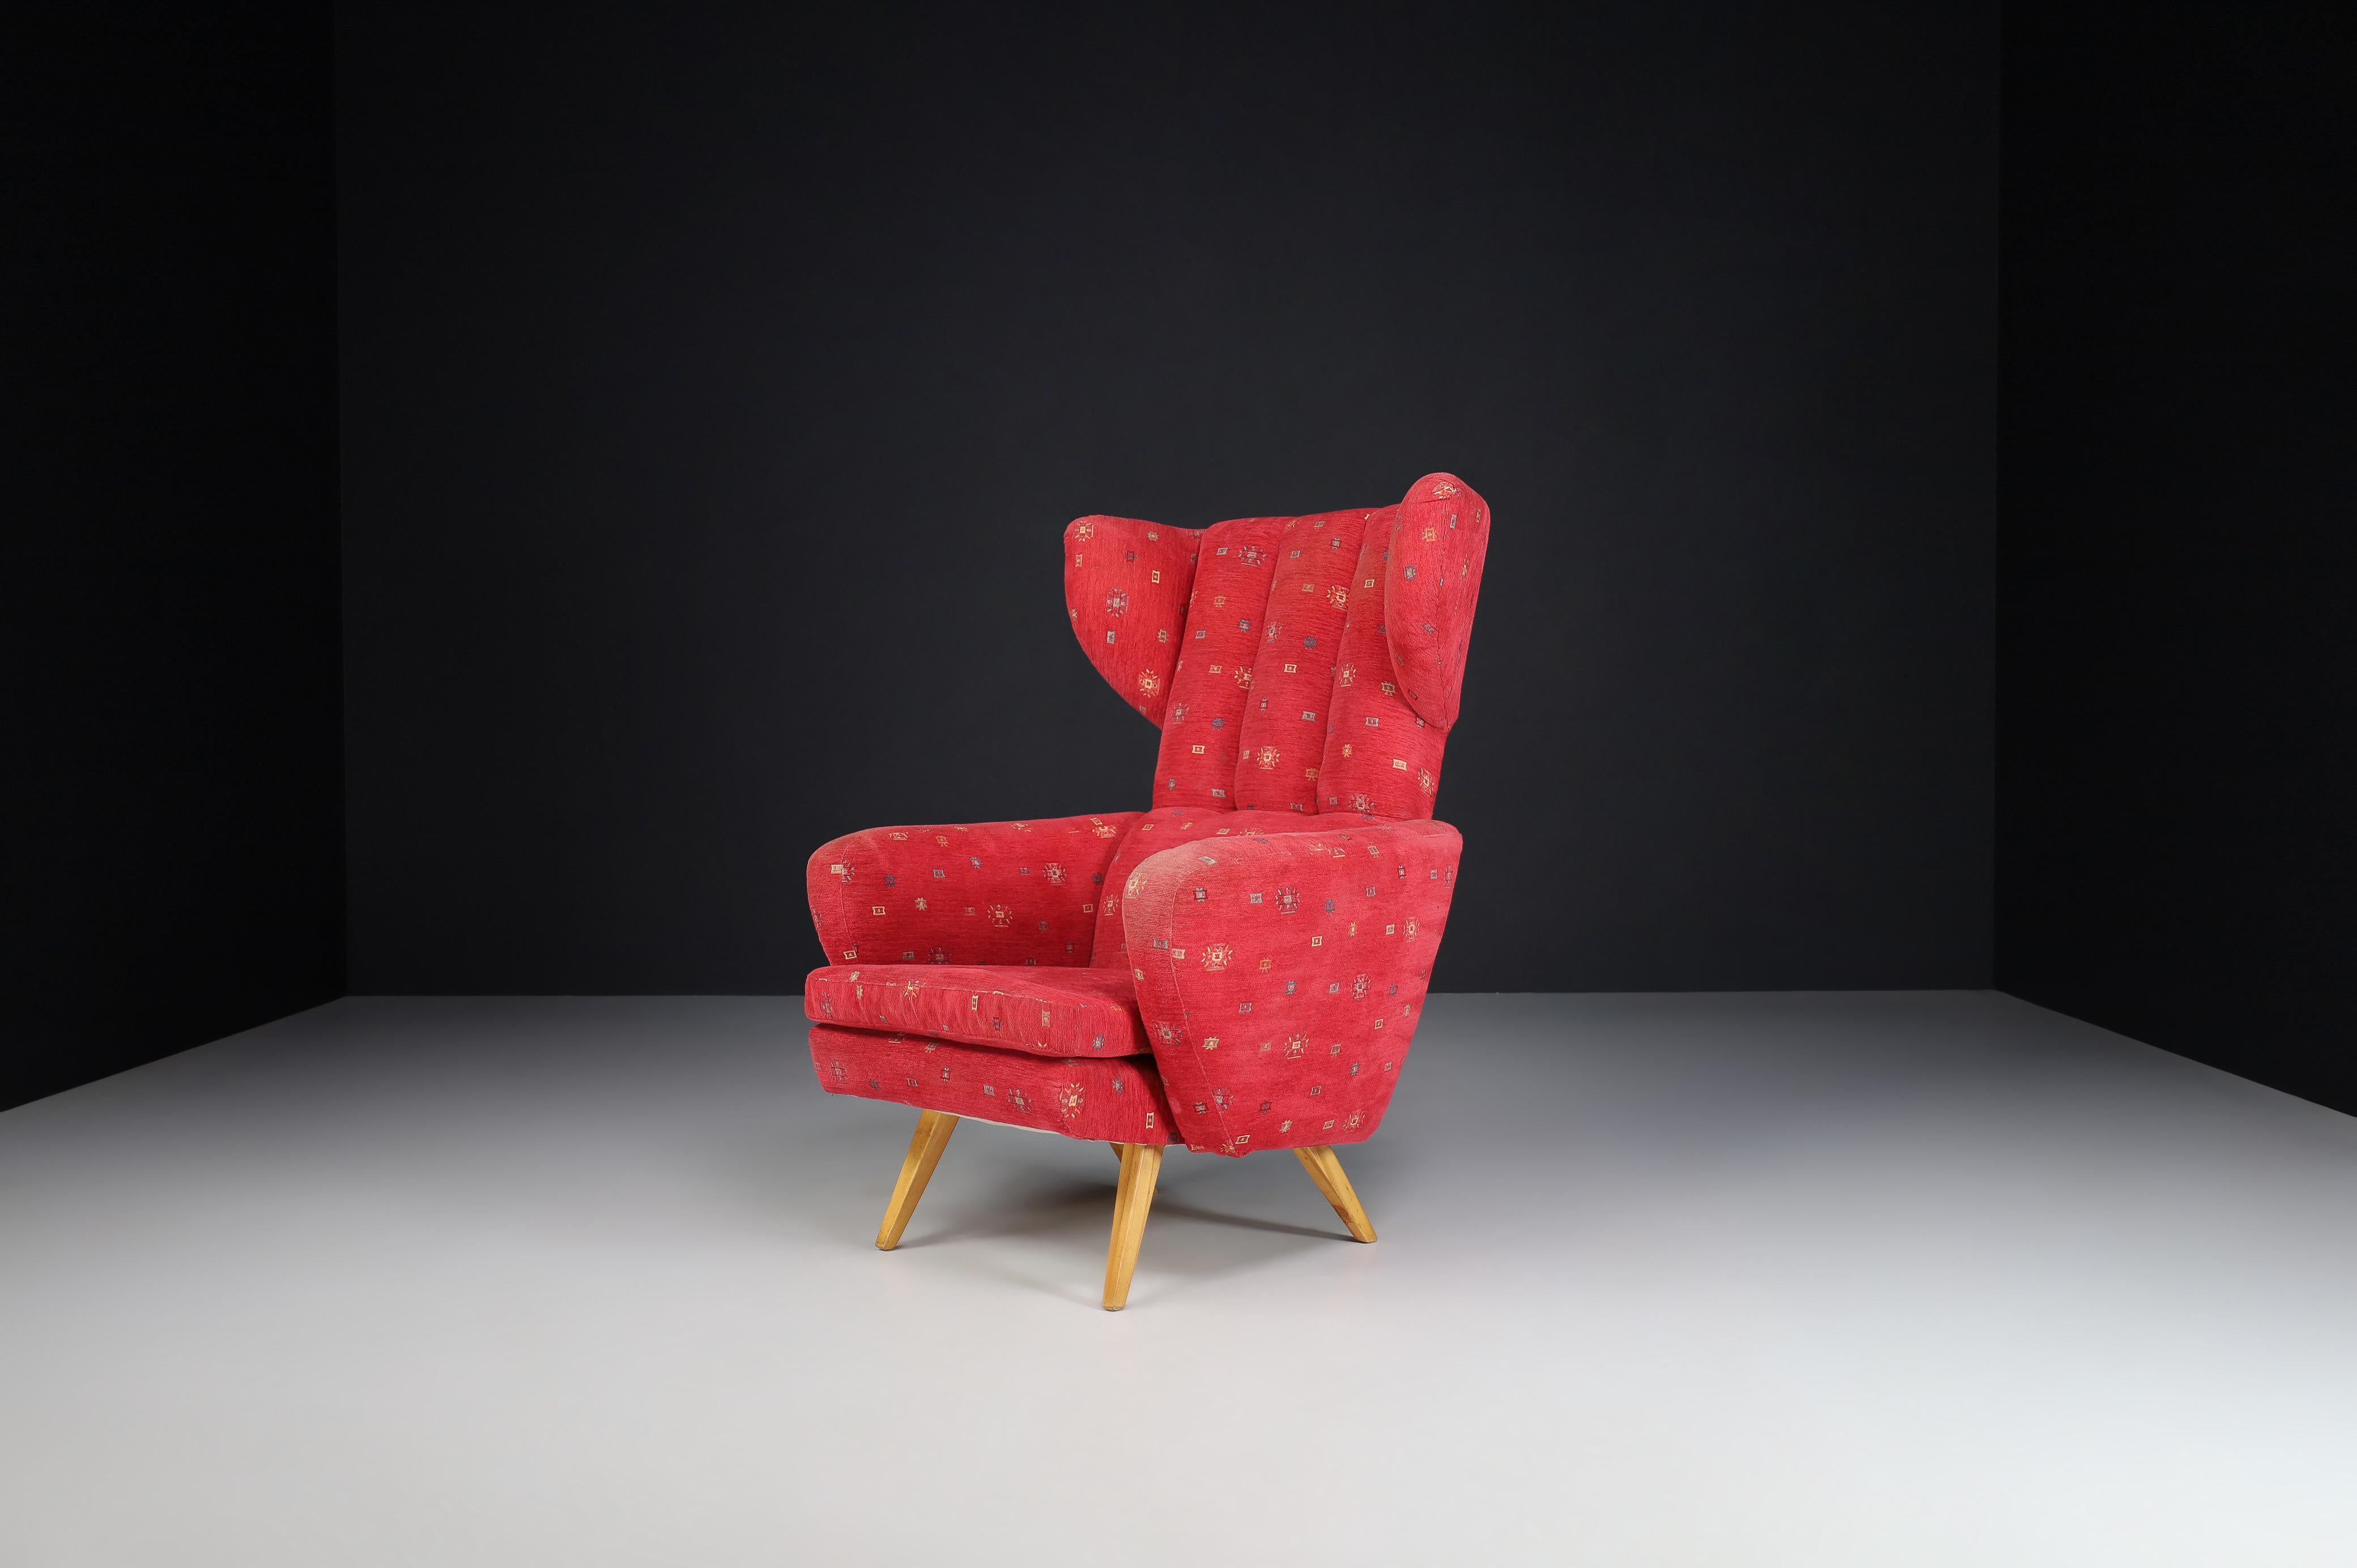 Wing Back Lounge chair in red Upholstery, Praque 1950s

Large midcentury wingback armchair in red upholstery, Czech republic 1950s. This armchair would be an eye-catching addition to any interior, such as a living room, family room, screening